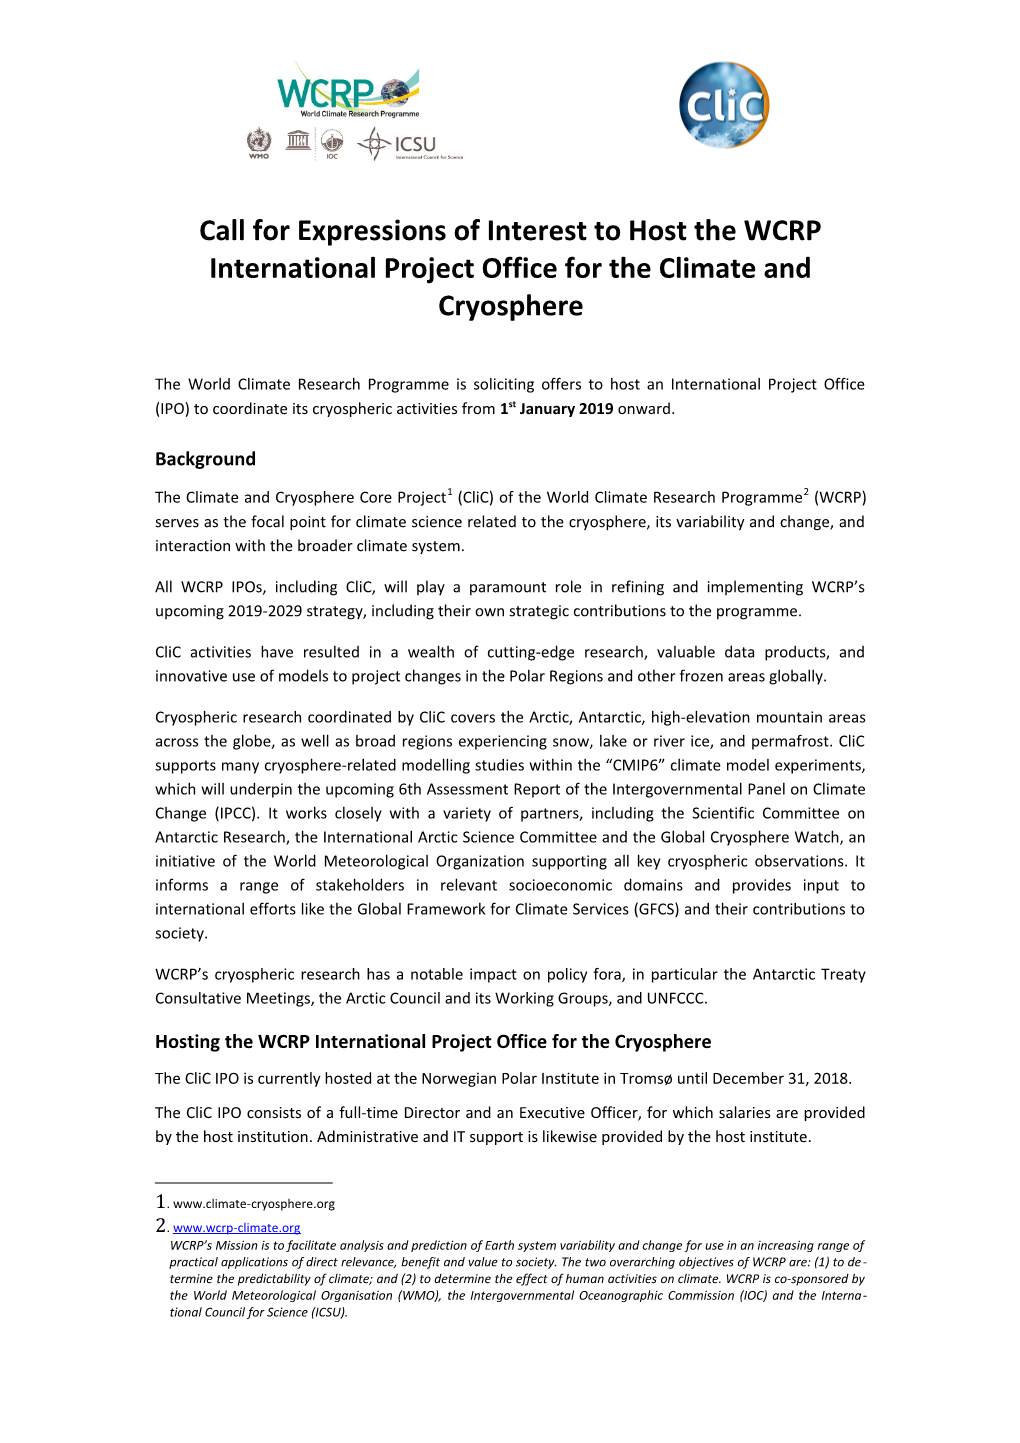 Call for Expressions of Interest to Host Thewcrp Internationalproject Office for the Climate